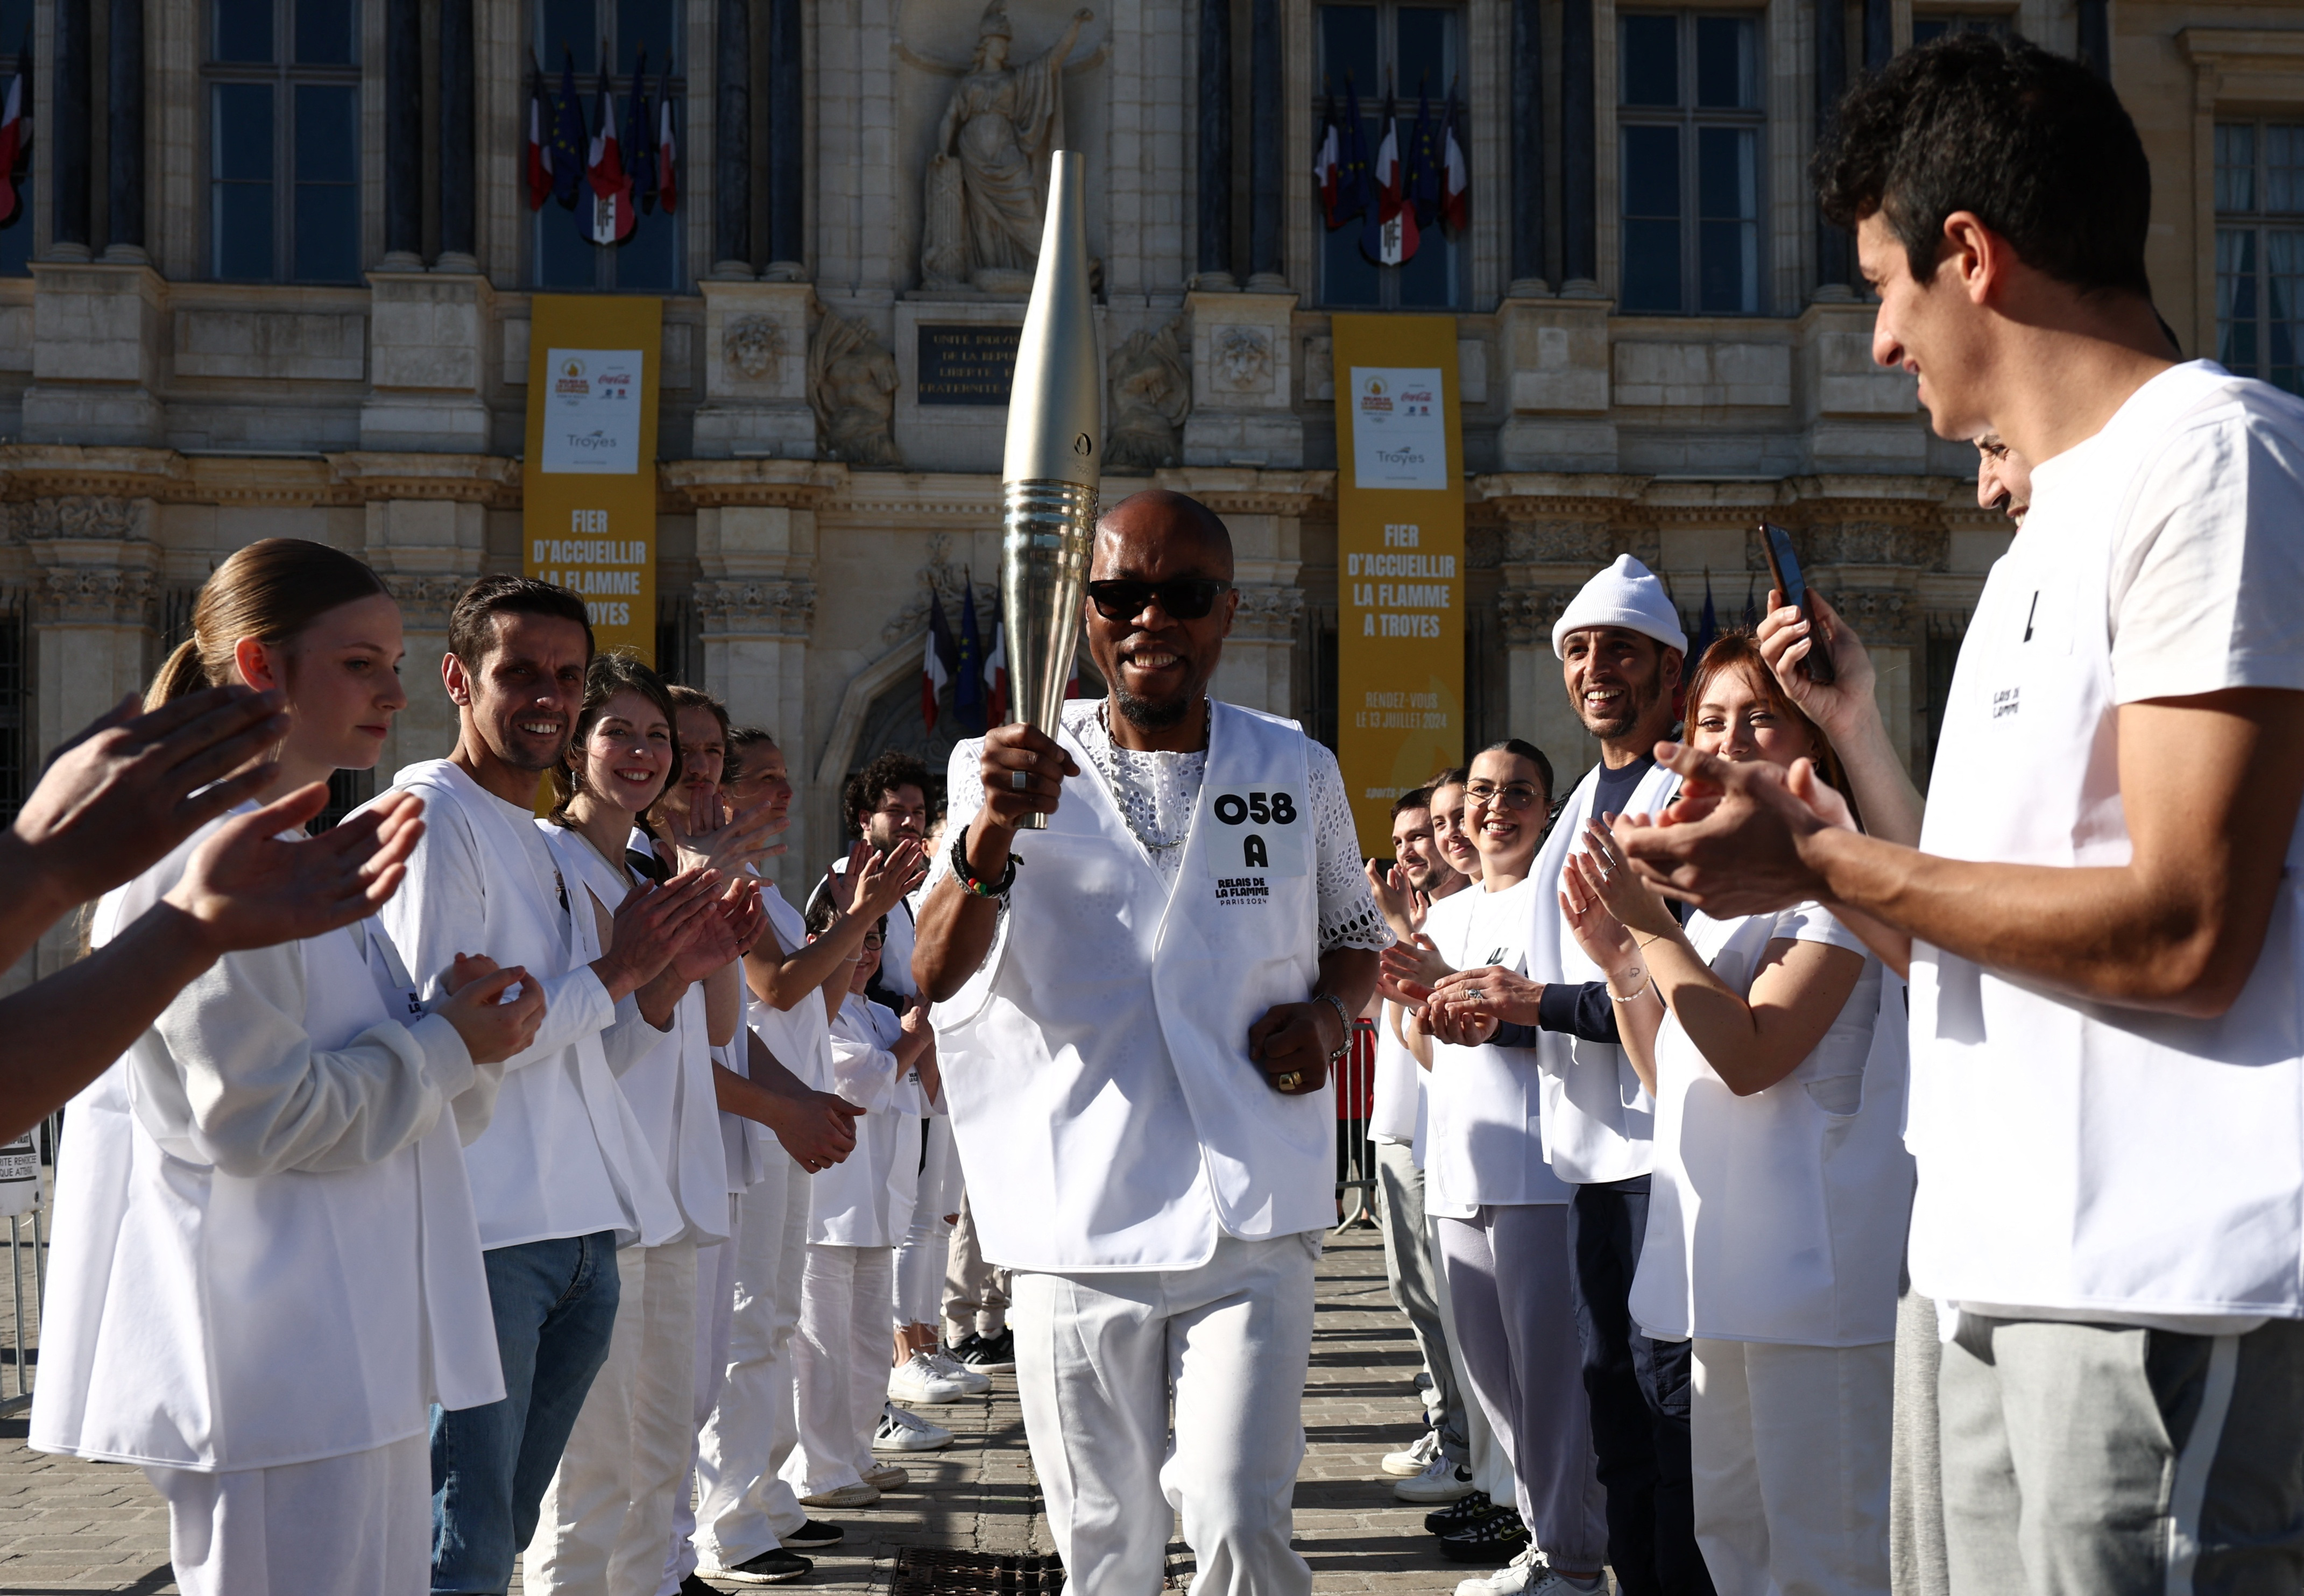 Paris 2024 volunteers perform a rehearsal for the Olympic torch relay in Troyes, France./Stephanie Lecocq/Reuters